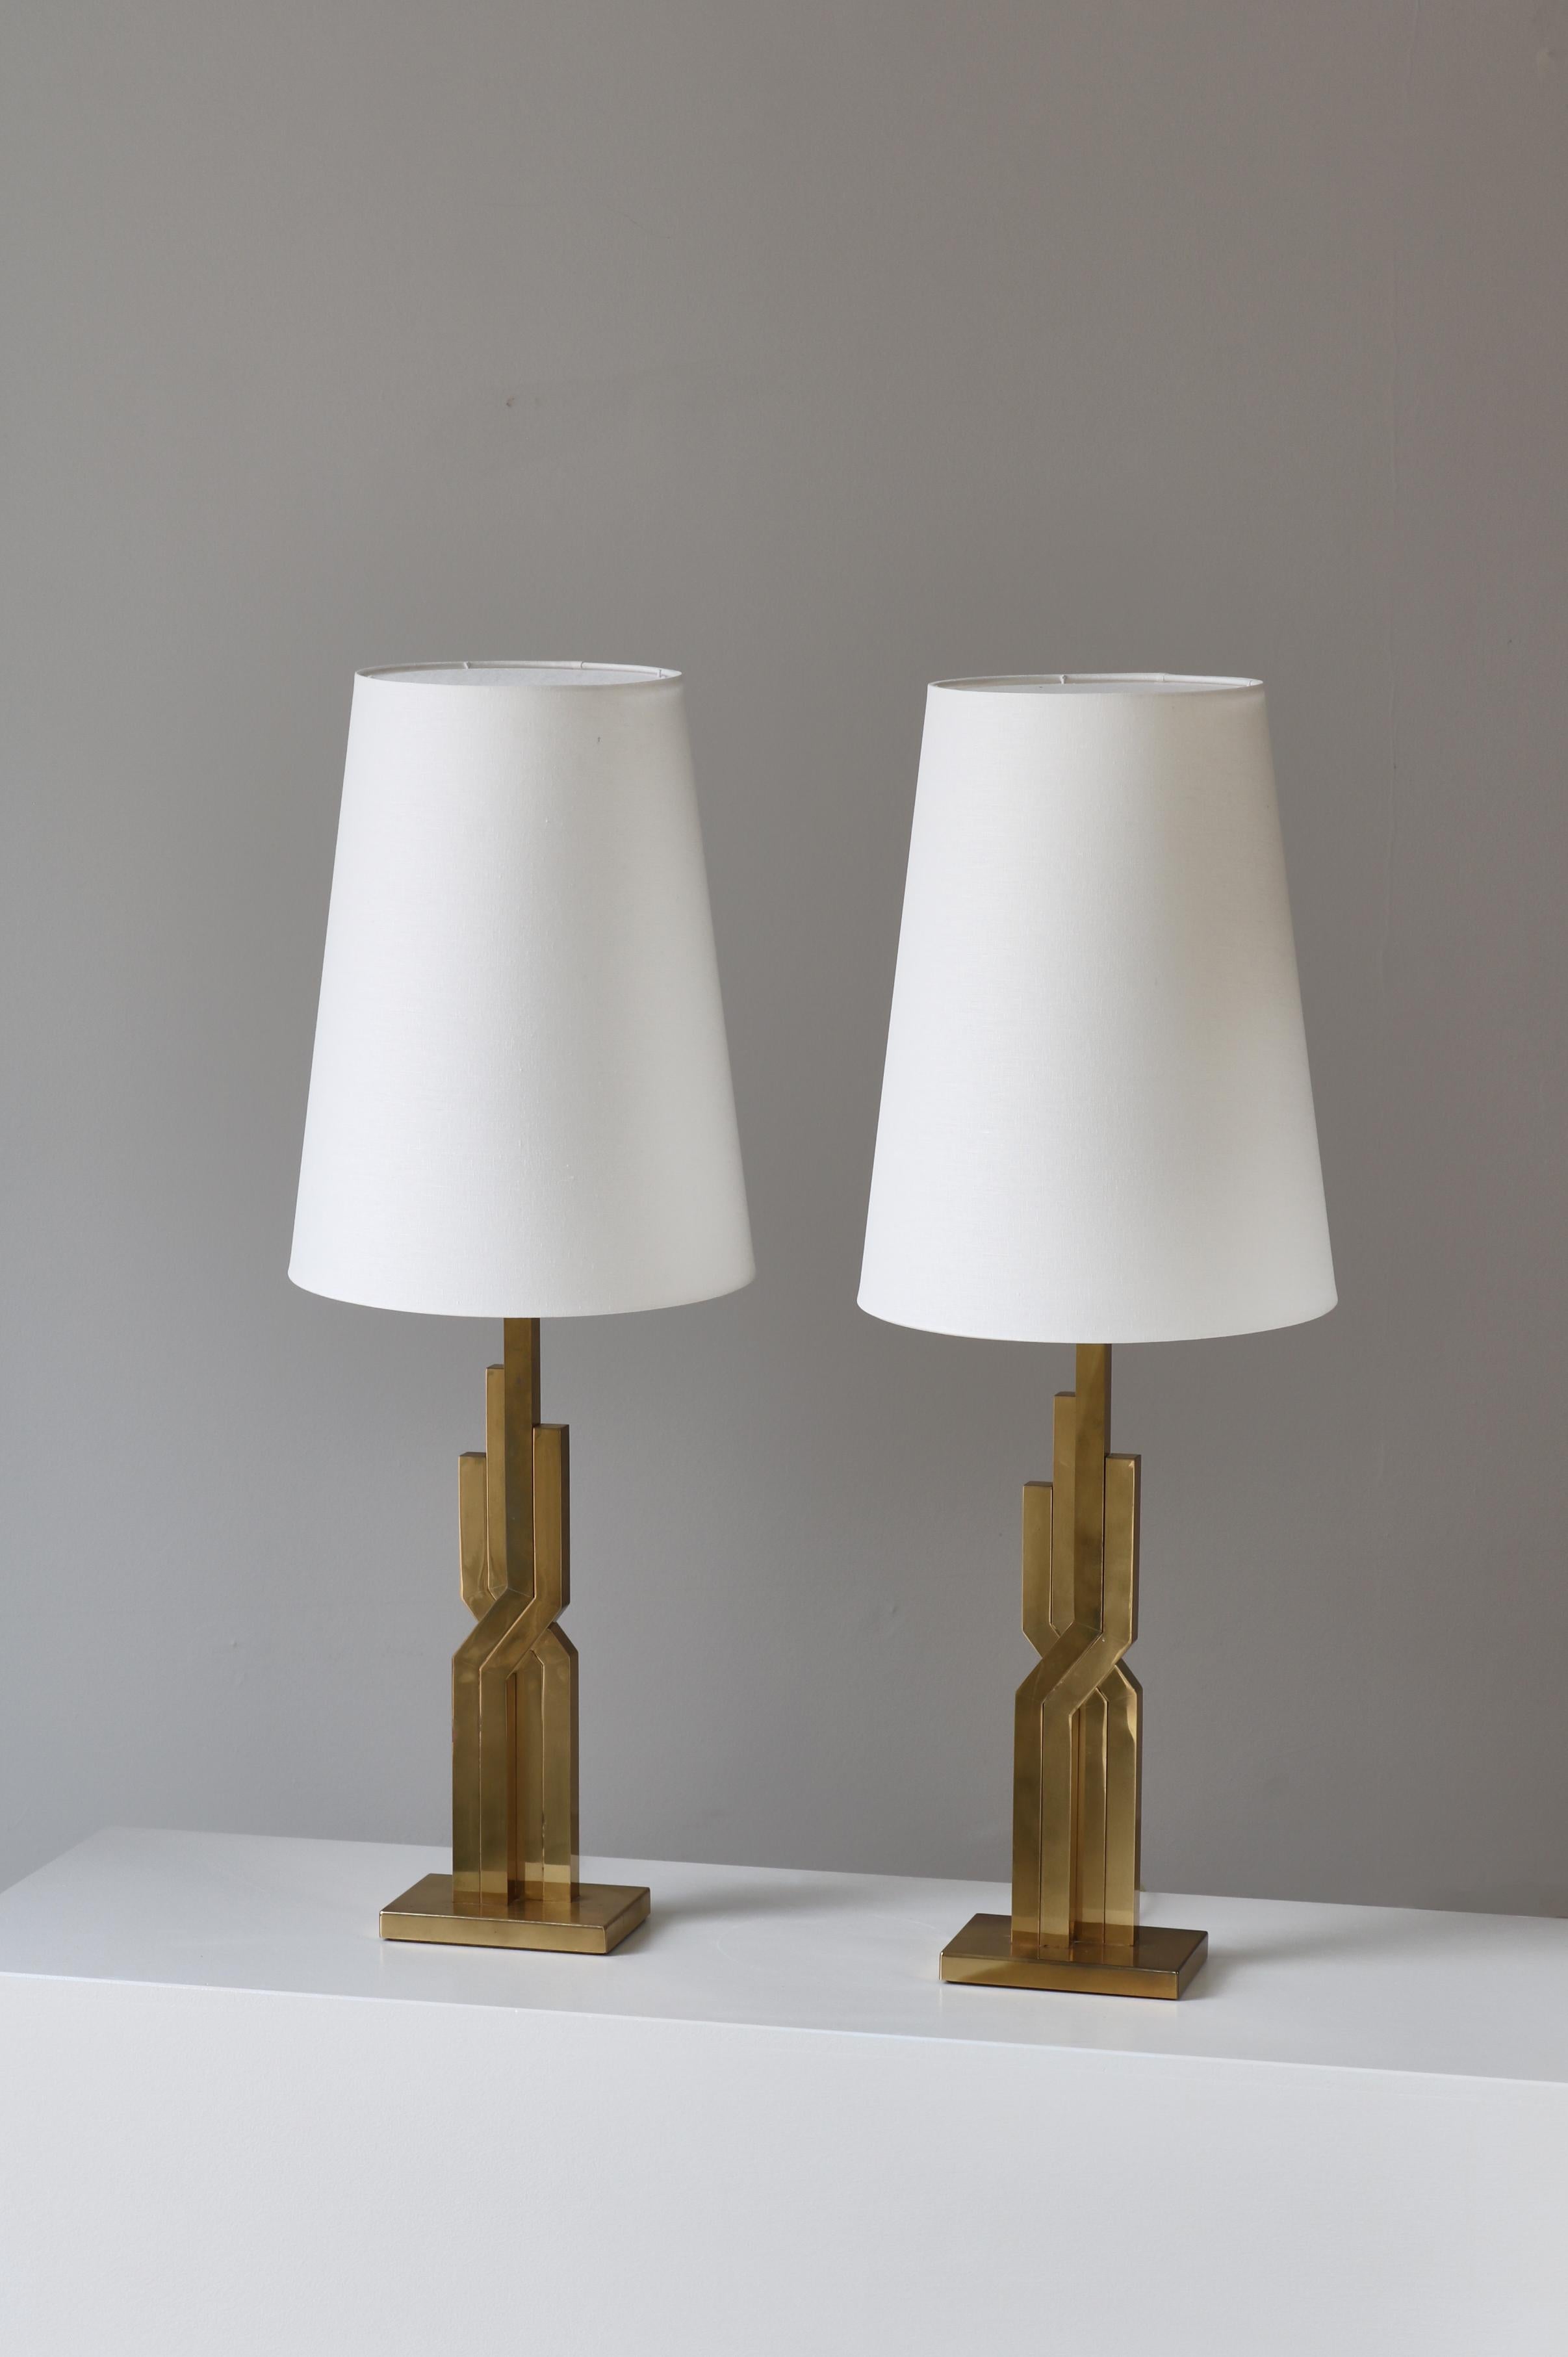 Large Danish Modern Table Lamps in Brass by Svend Aage Holm-Sørensen, 1960s For Sale 15